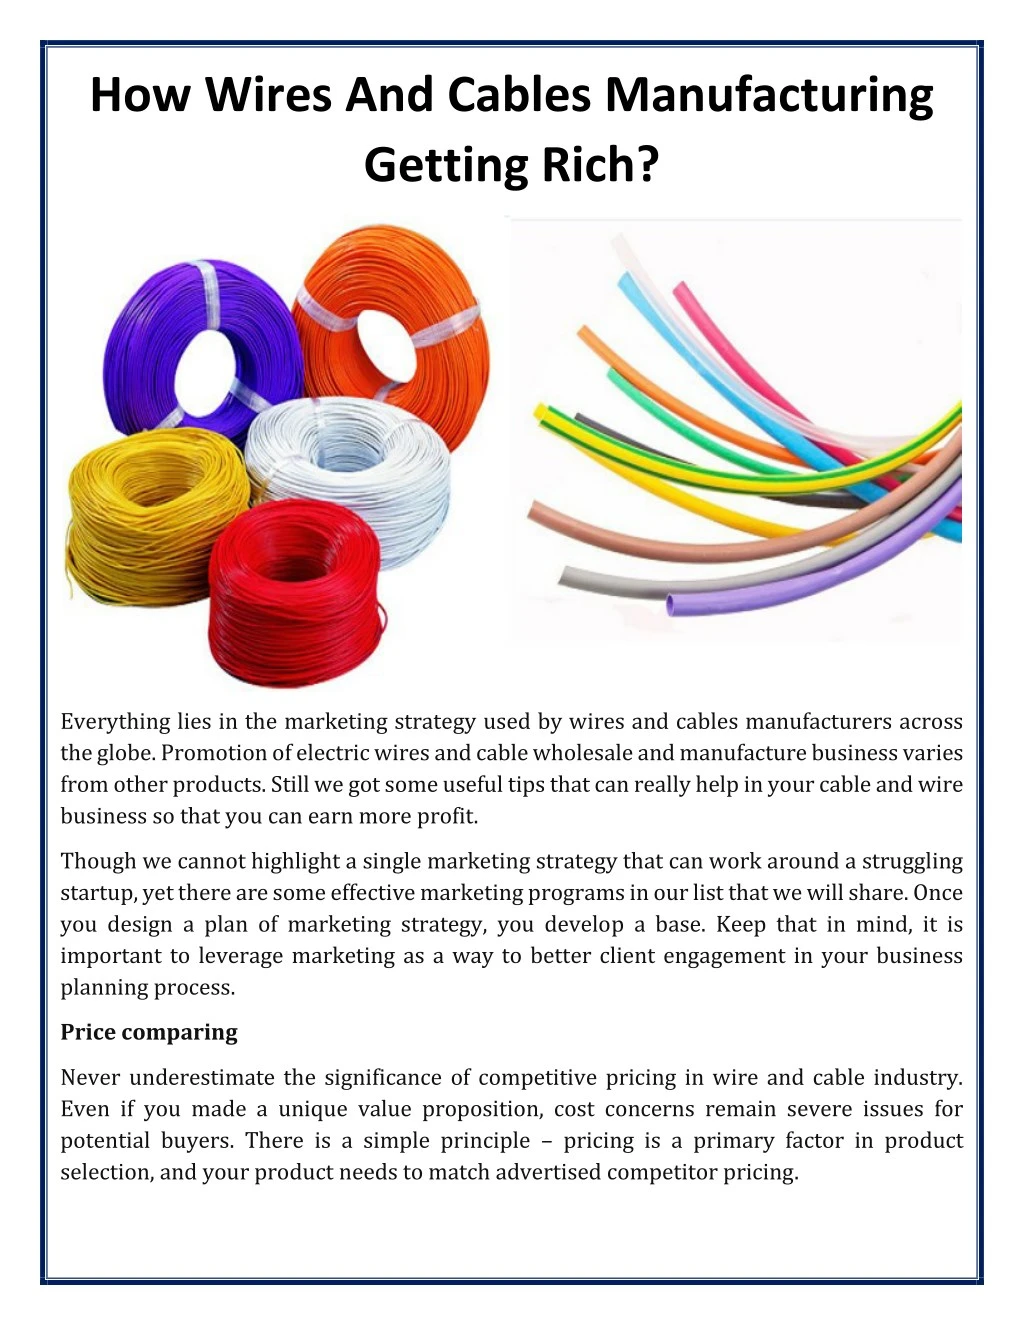 how wires and cables manufacturing getting rich